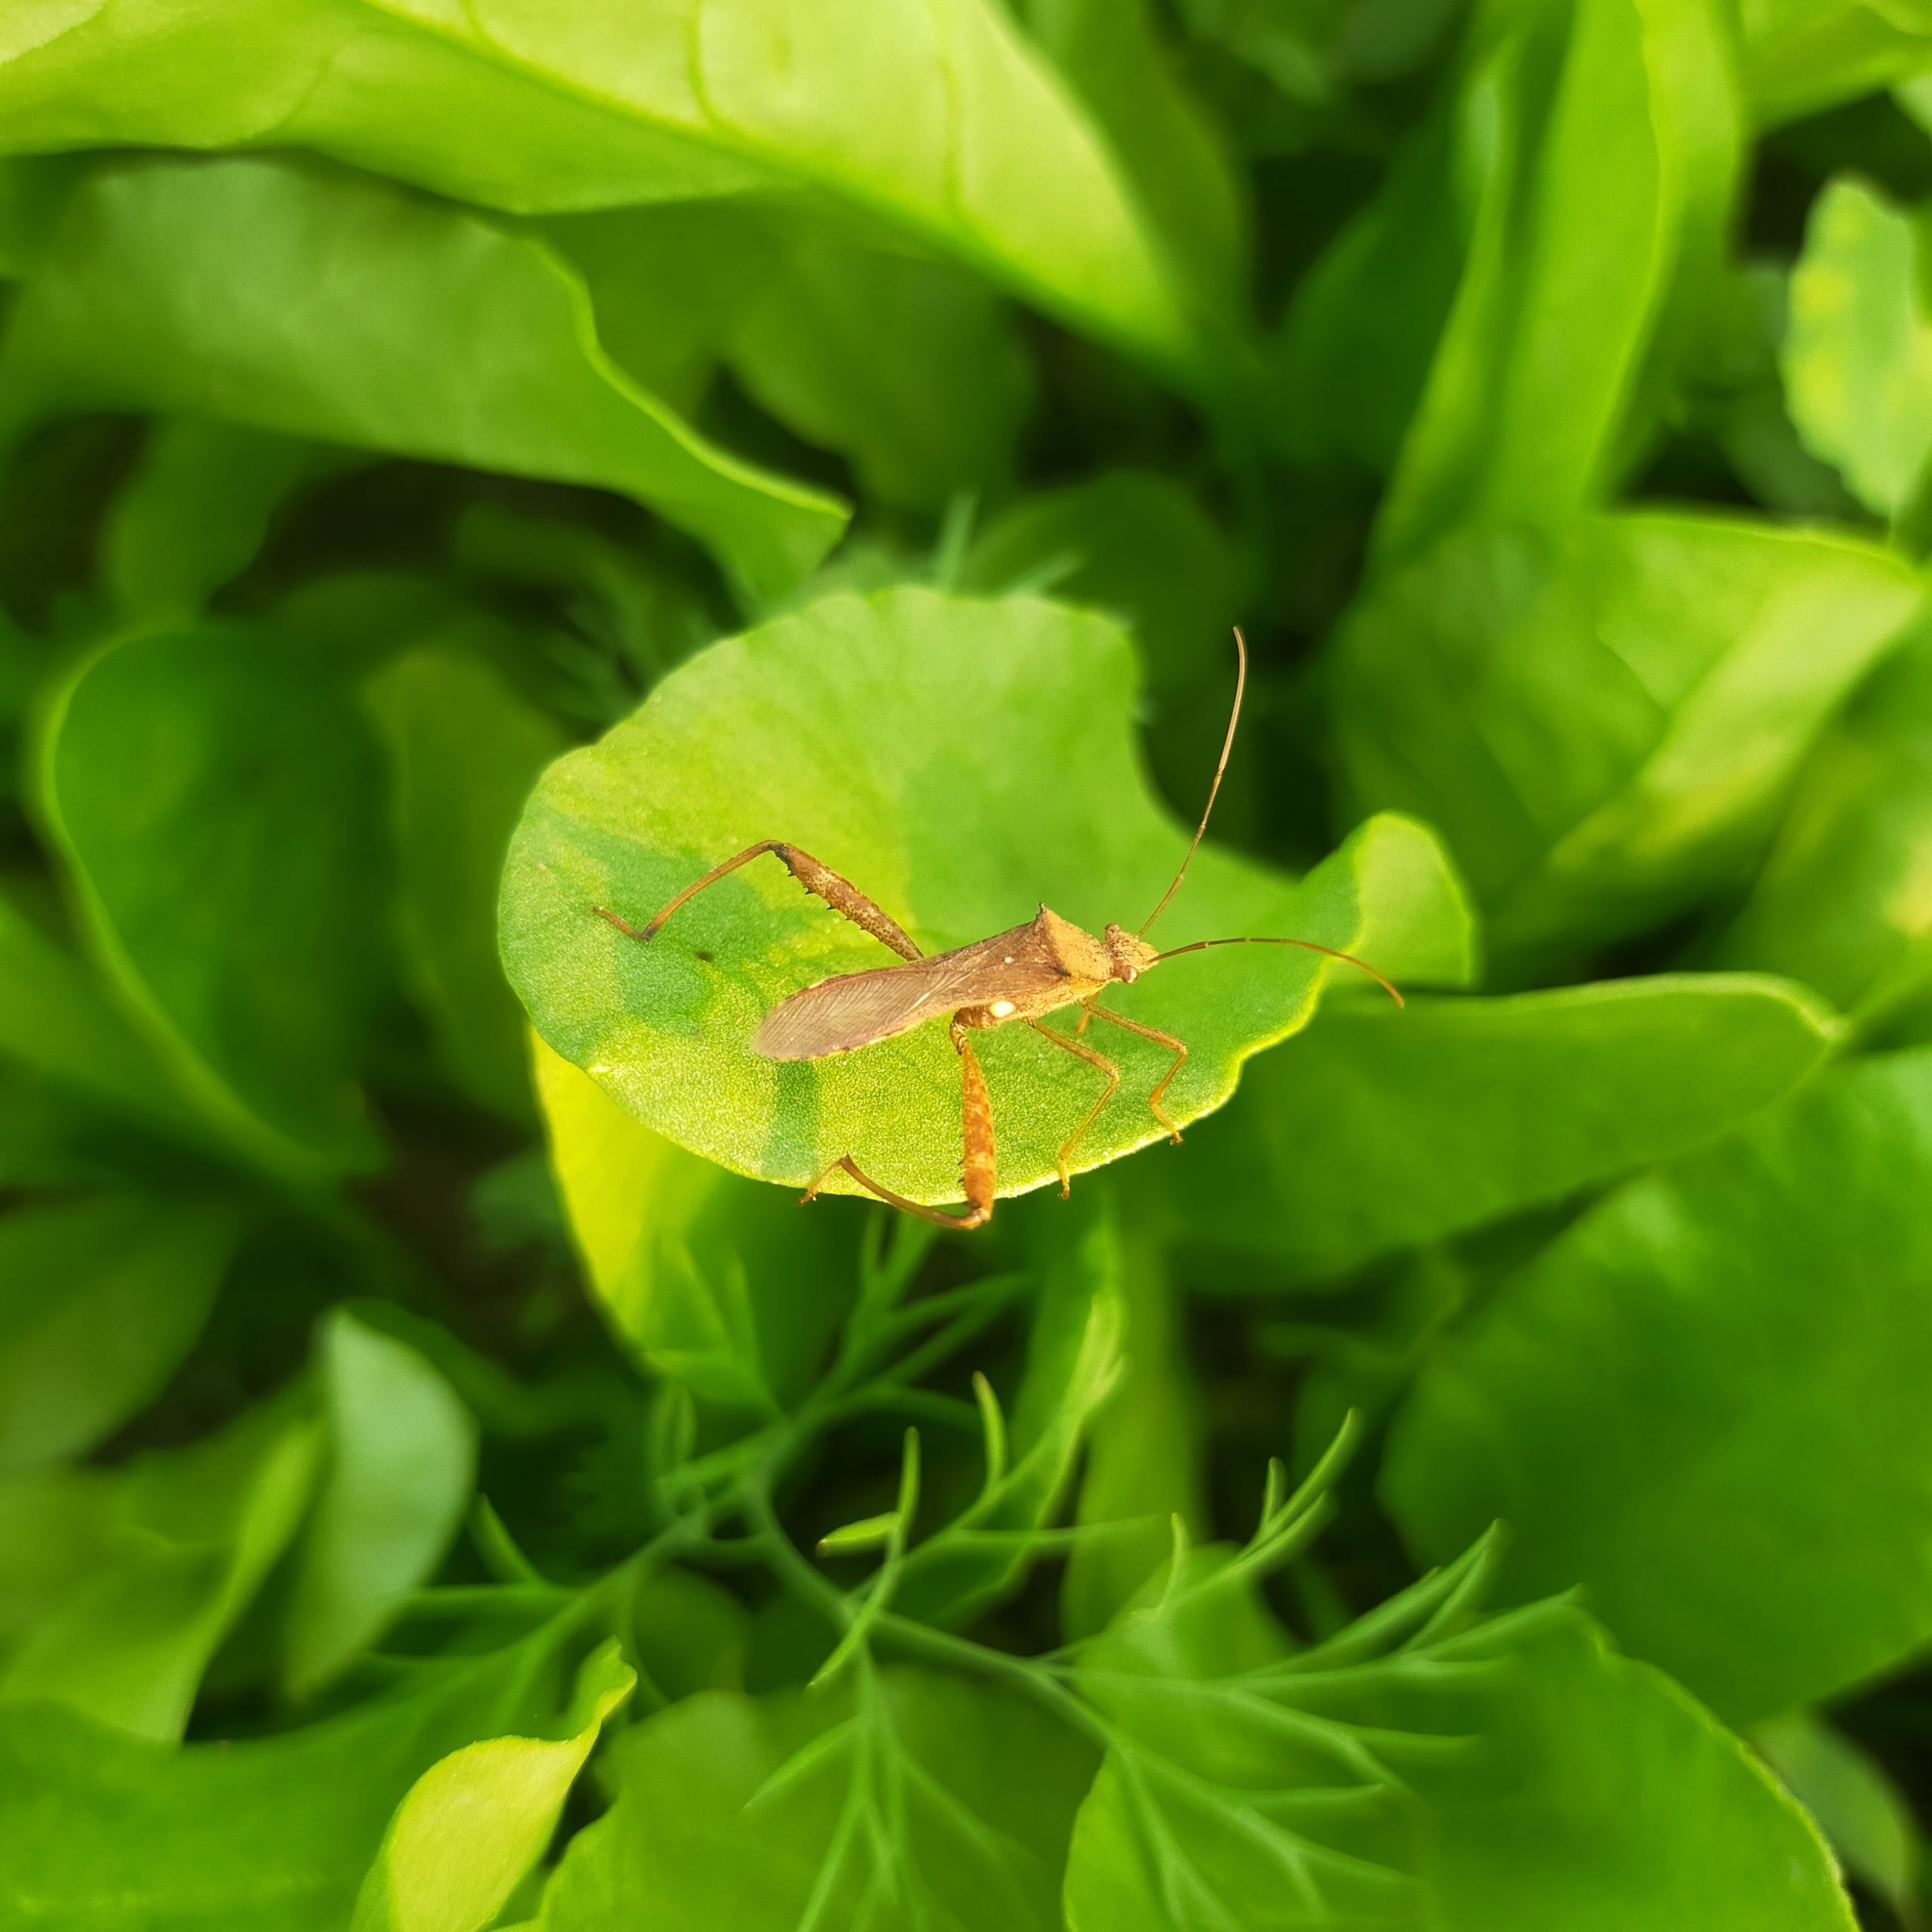 Insect on the leaf